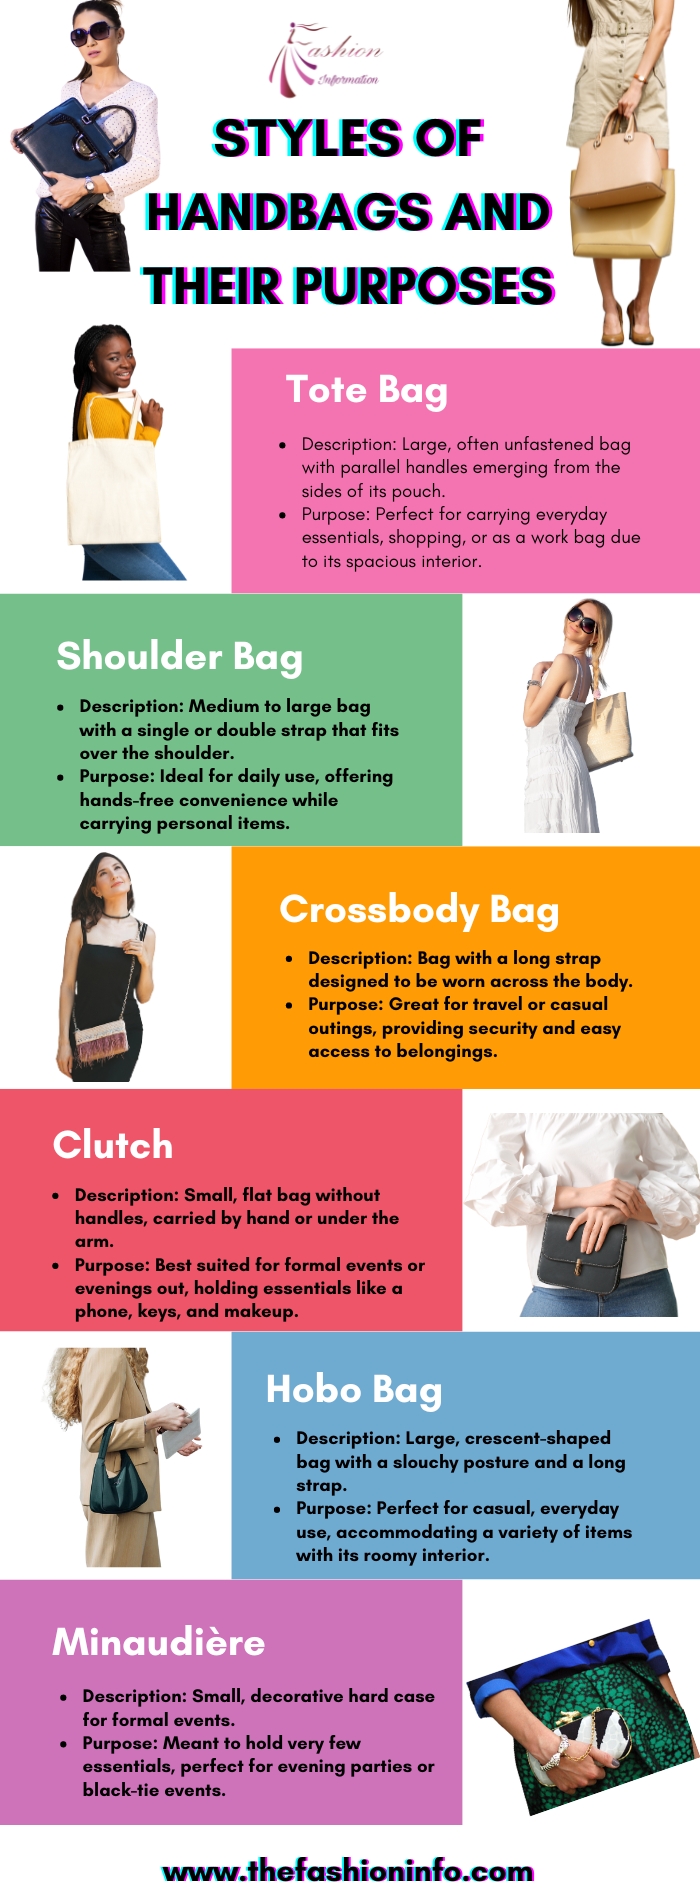 Styles Of Handbags And Their Purposes